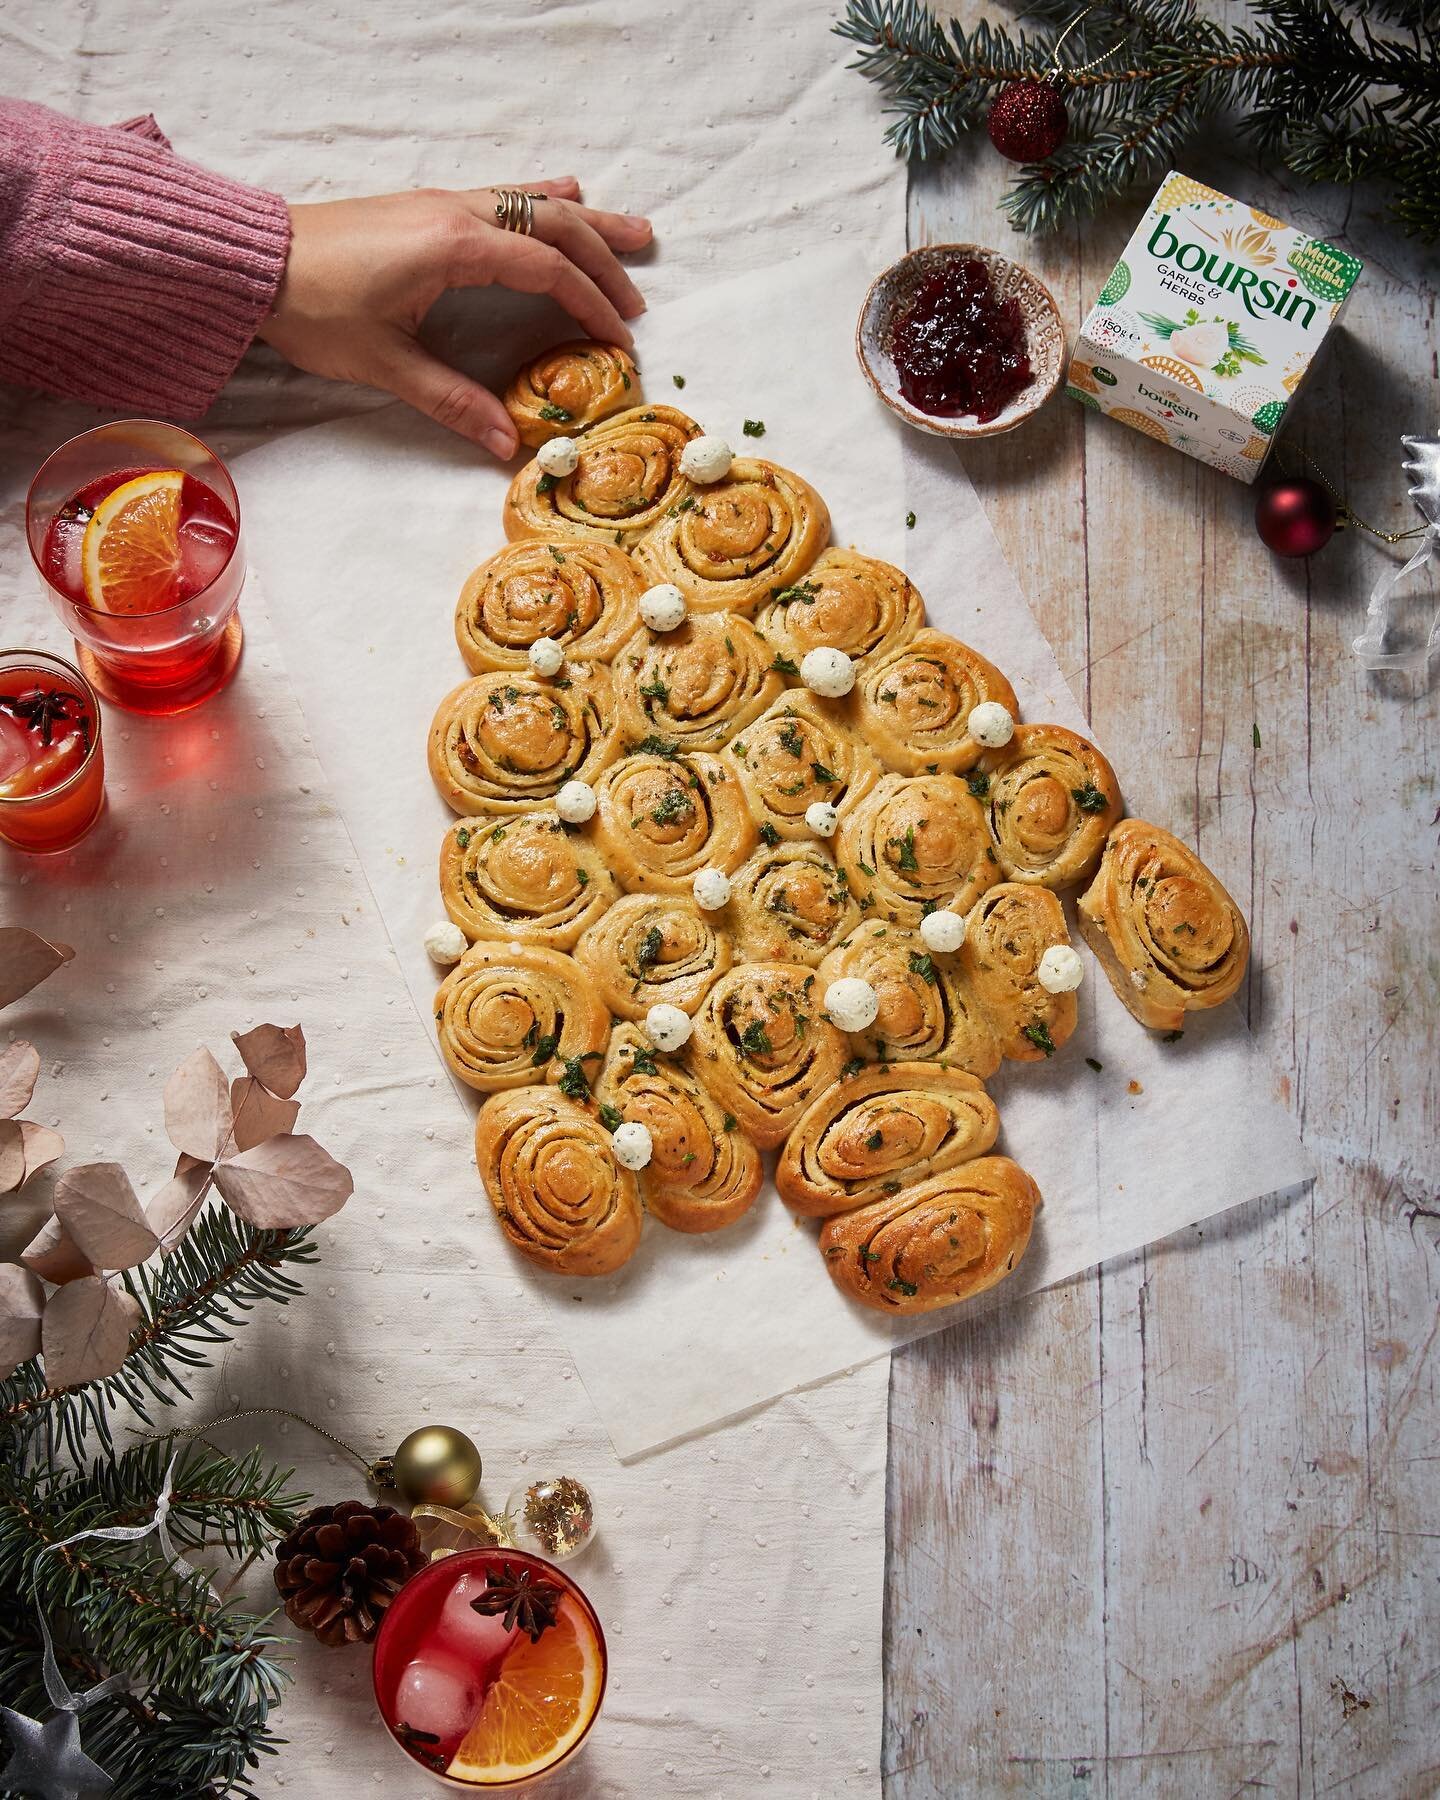 (AD) It&rsquo;s GIVEAWAY time! In collaboration with @Boursinuk, I&rsquo;m giving away a Boursin bundle to inspire you to make your own festive culinary creations 🎄. I&rsquo;ve used Boursin Garlic &amp; Herbs in this cheesy garlic pull-apart bread (